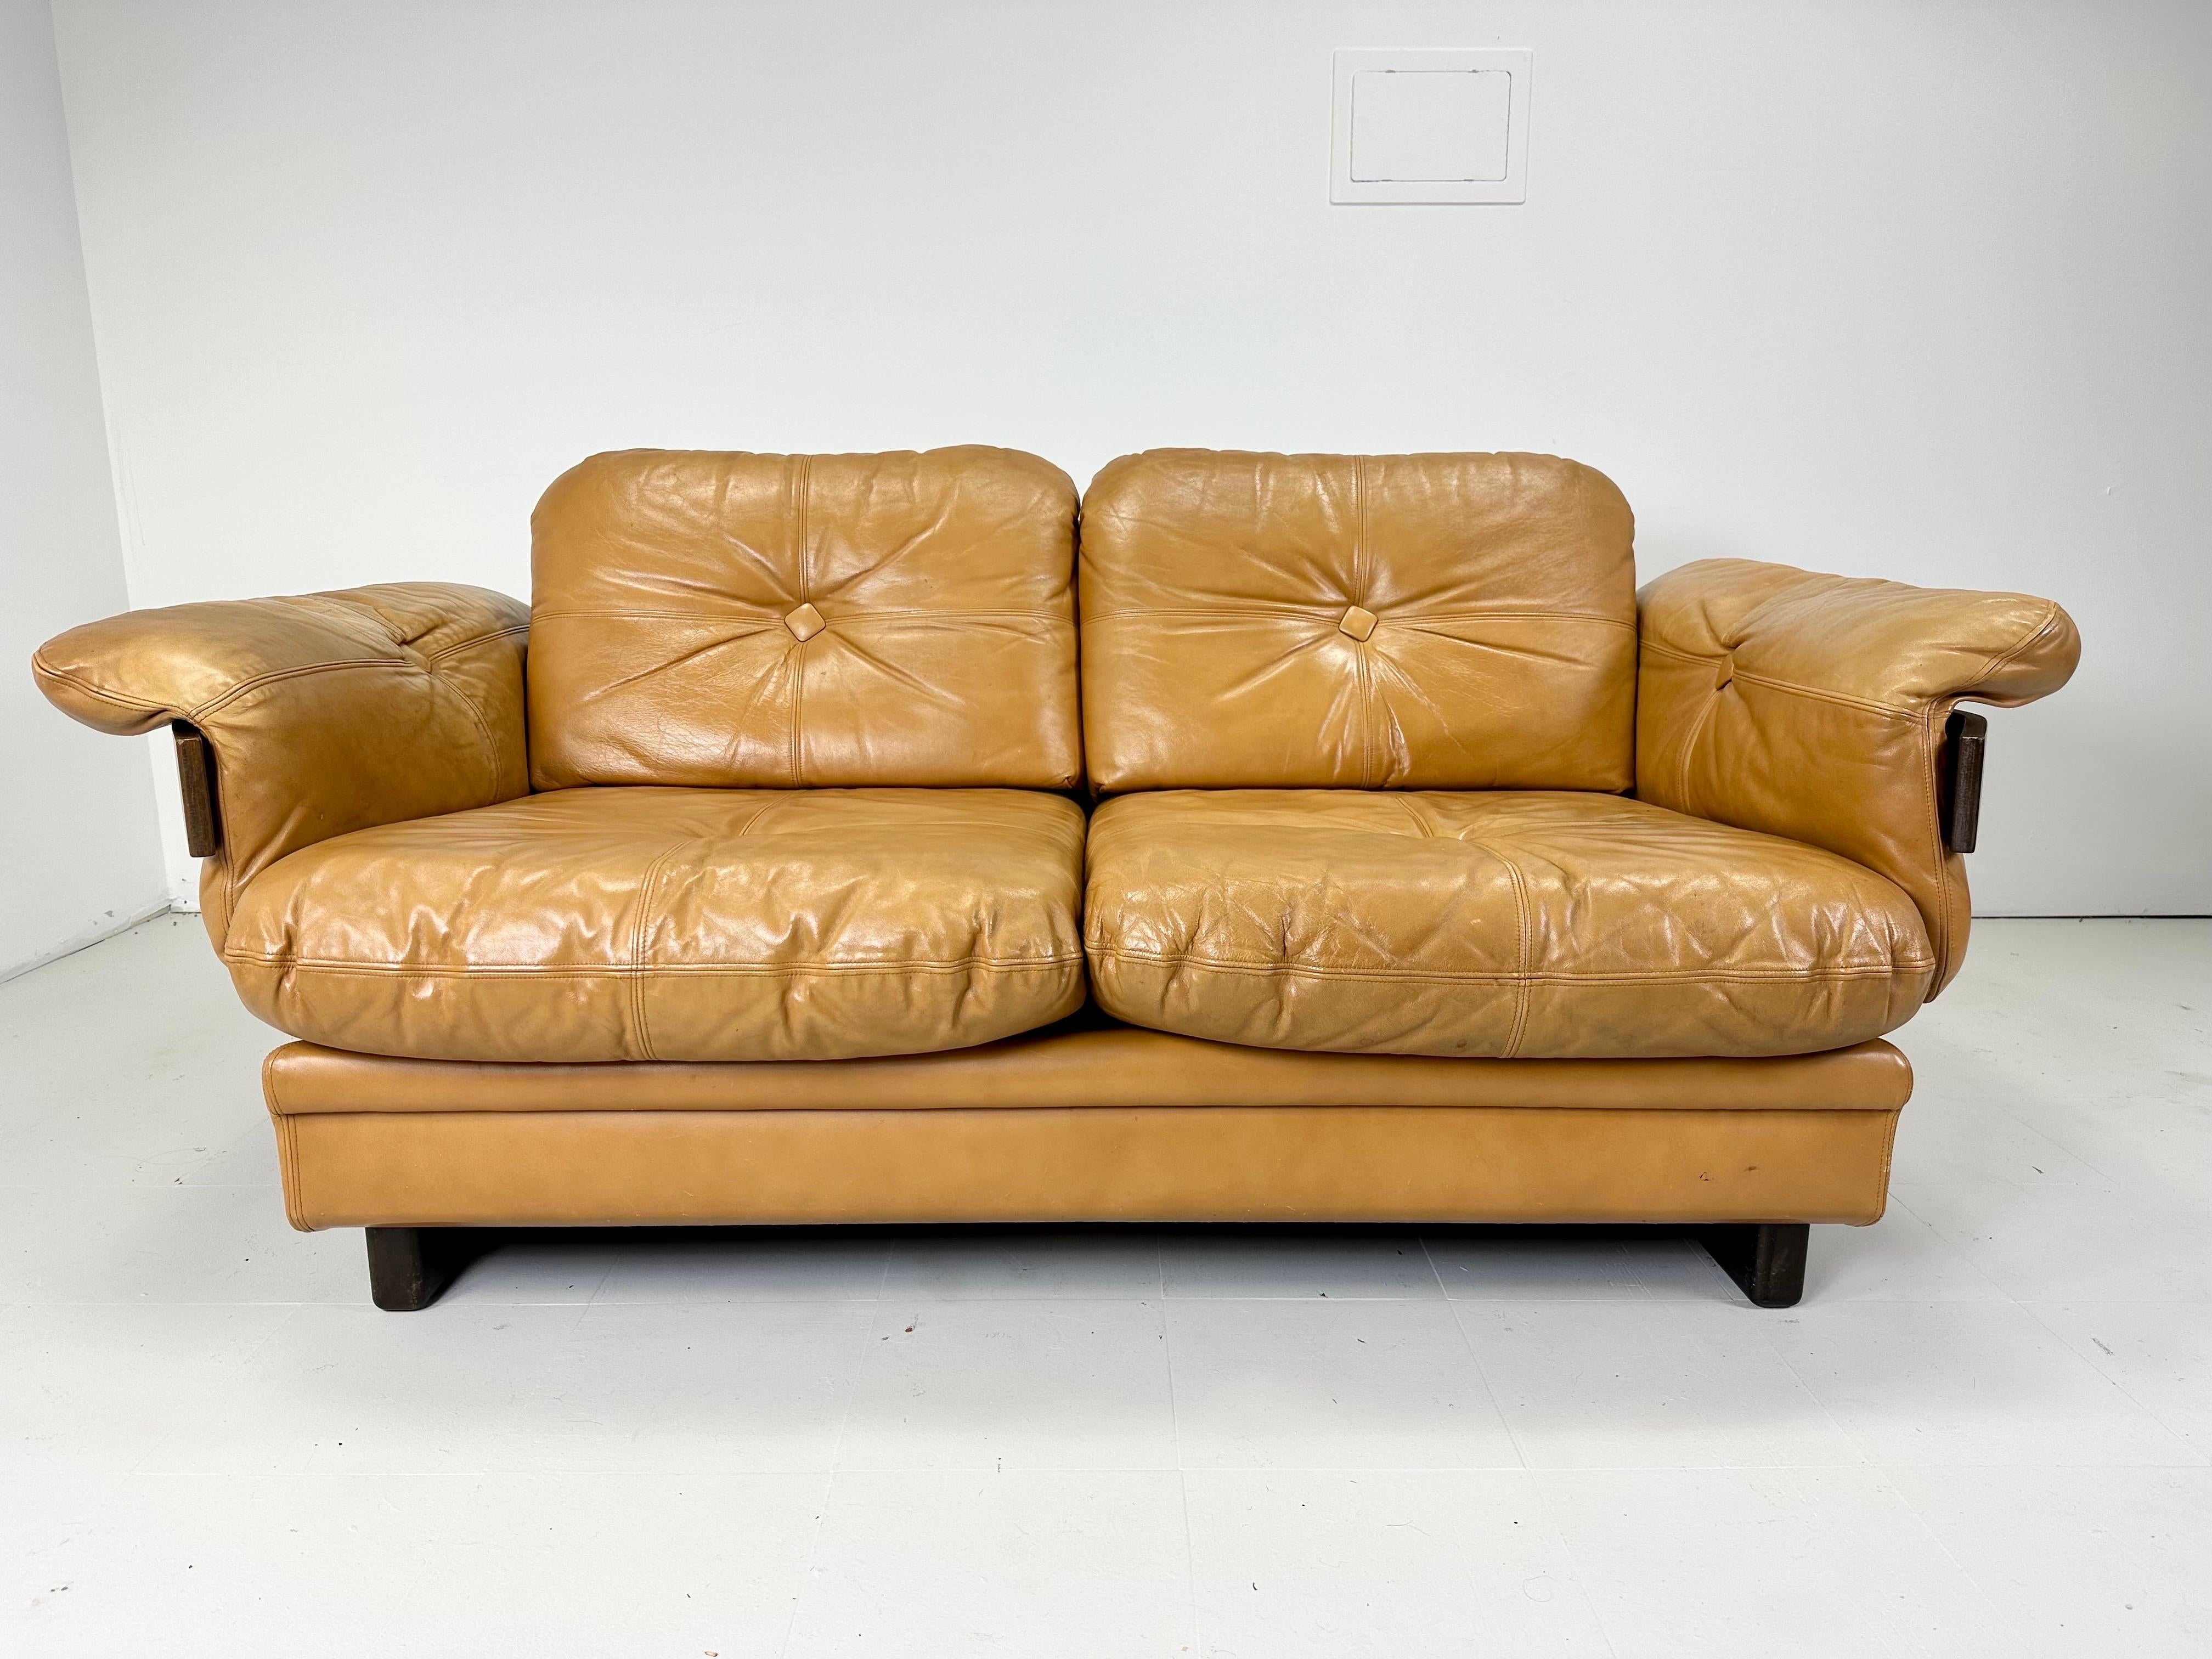 1970’s Leather Settee. Bentwood arms with brass details. Button Cushions. Soft light Butterscotch color vintage leather. Sofa sits low and deep for lounging comfort. Matching sofa available

Delivery to NYC area for $4751970’s Leather Settee